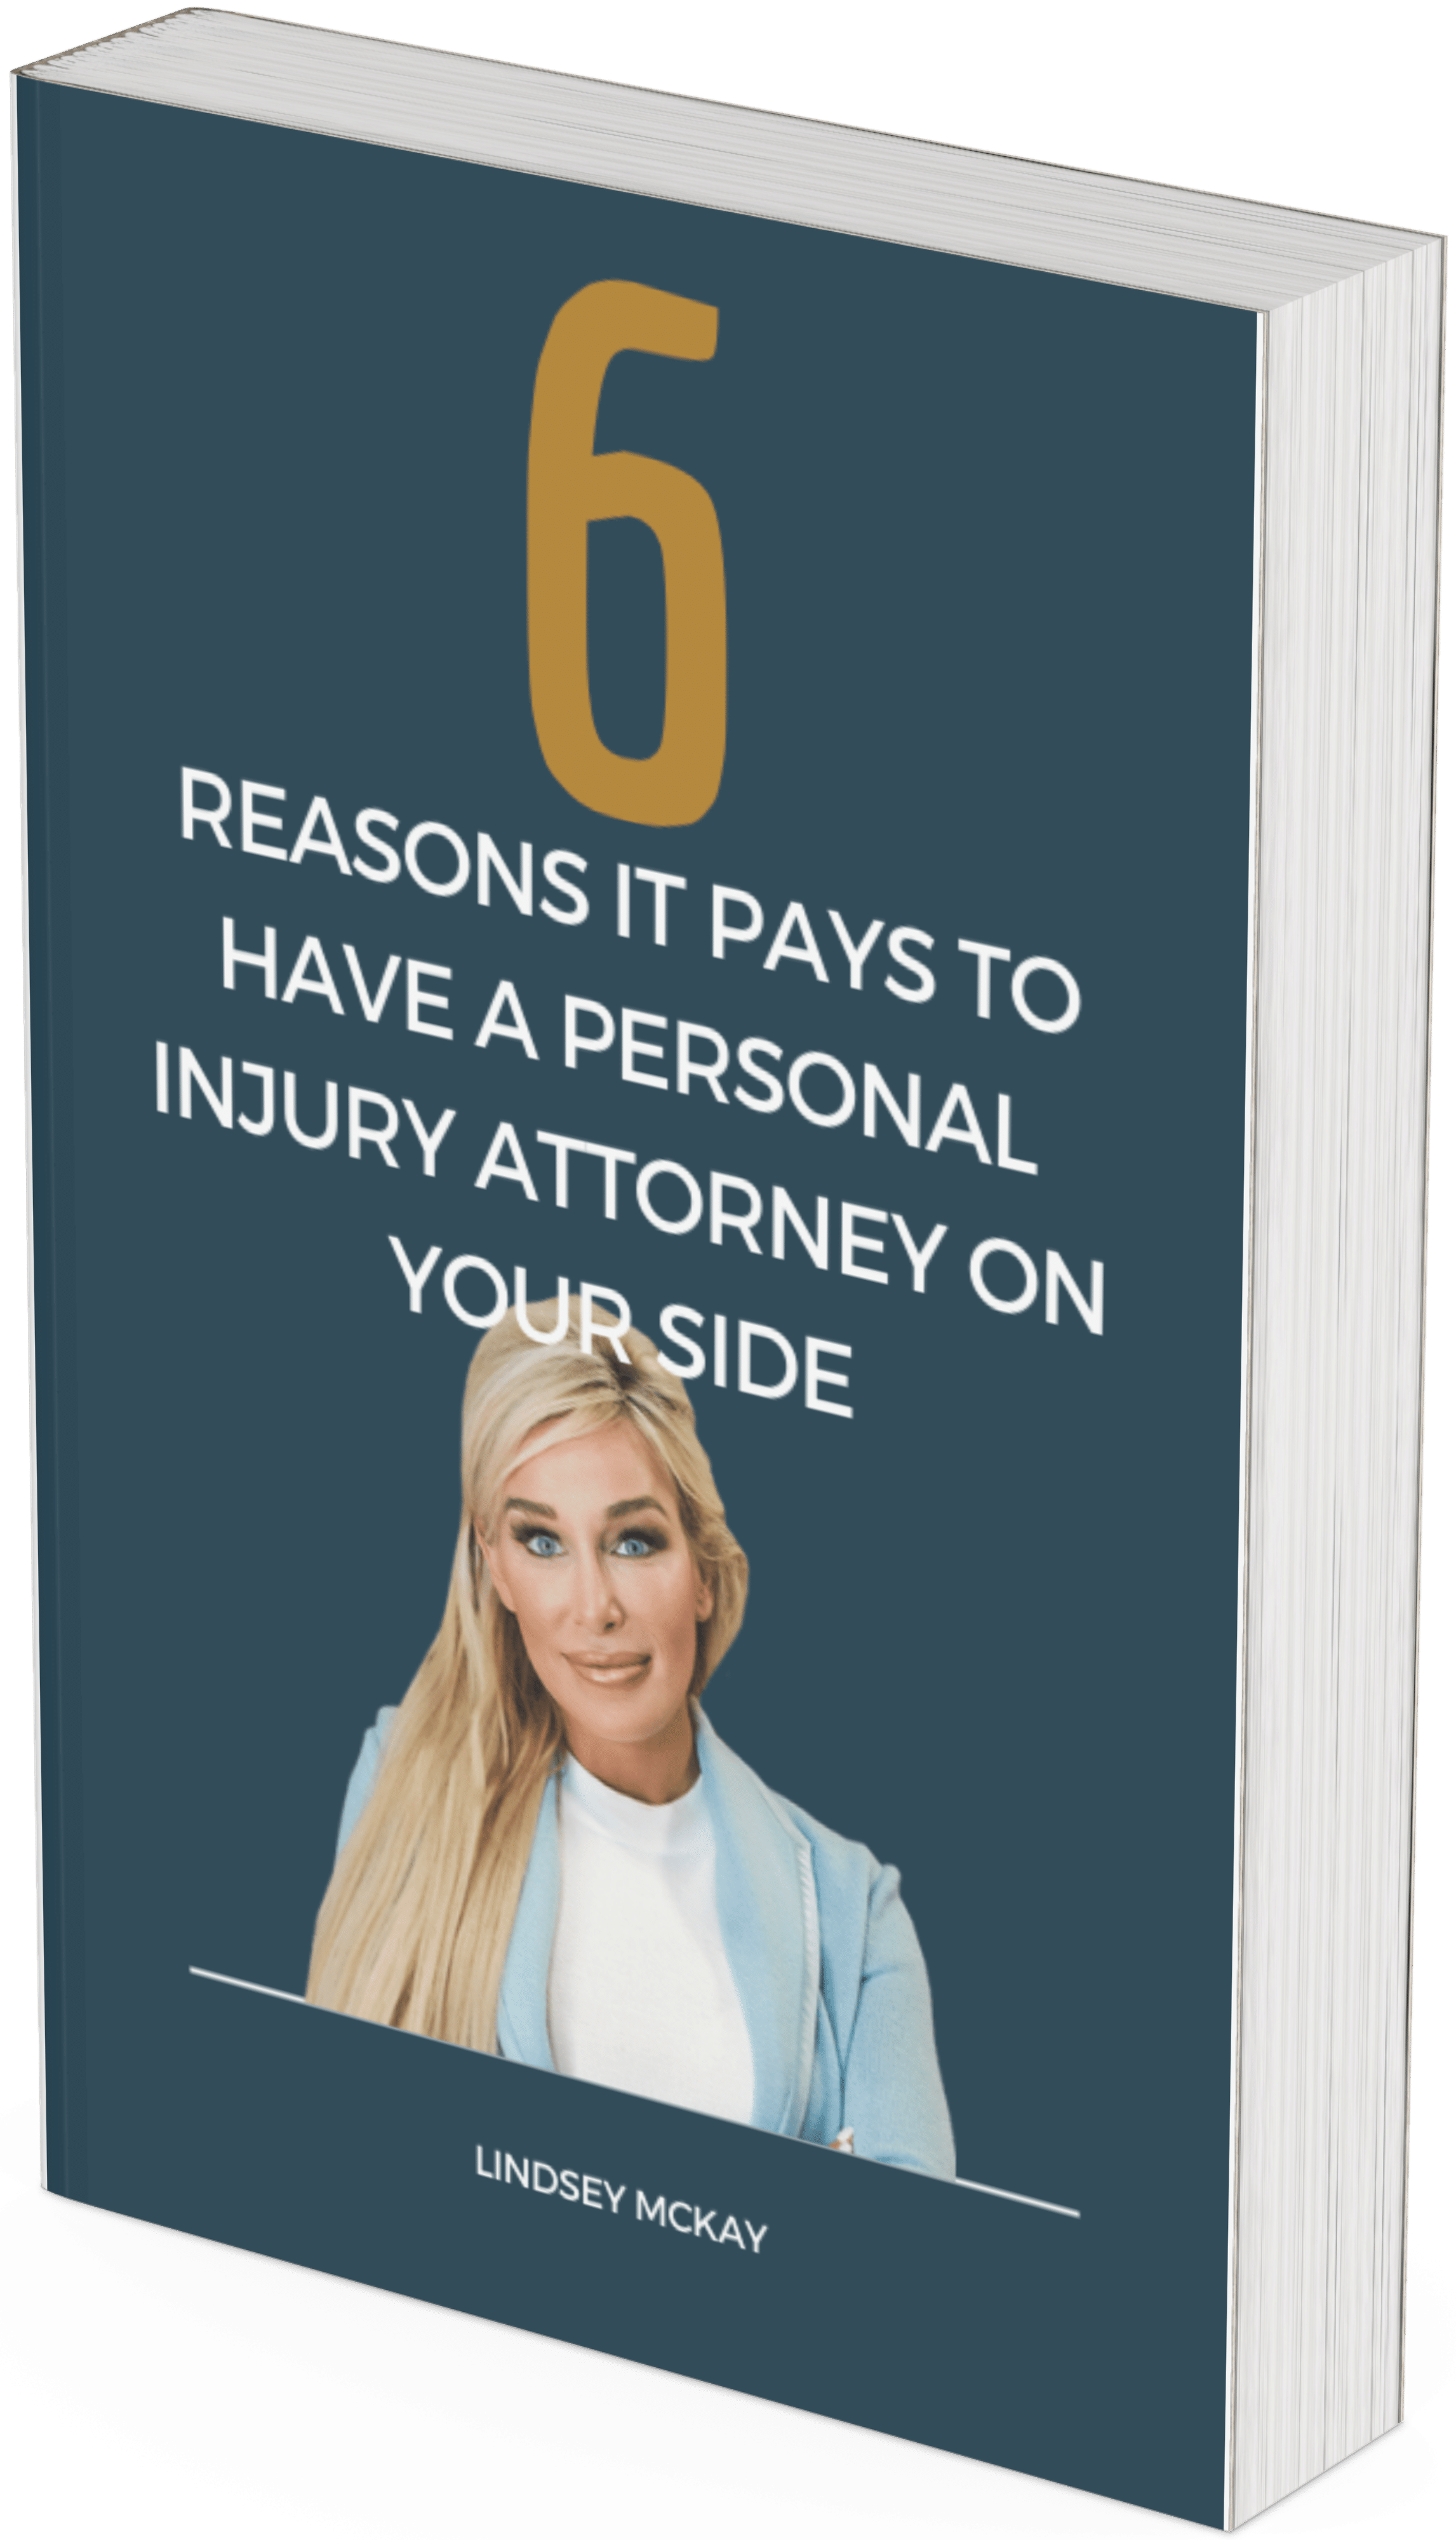 6 Reasons It Pays To Have a Personal Injury Attorney on Your Side​